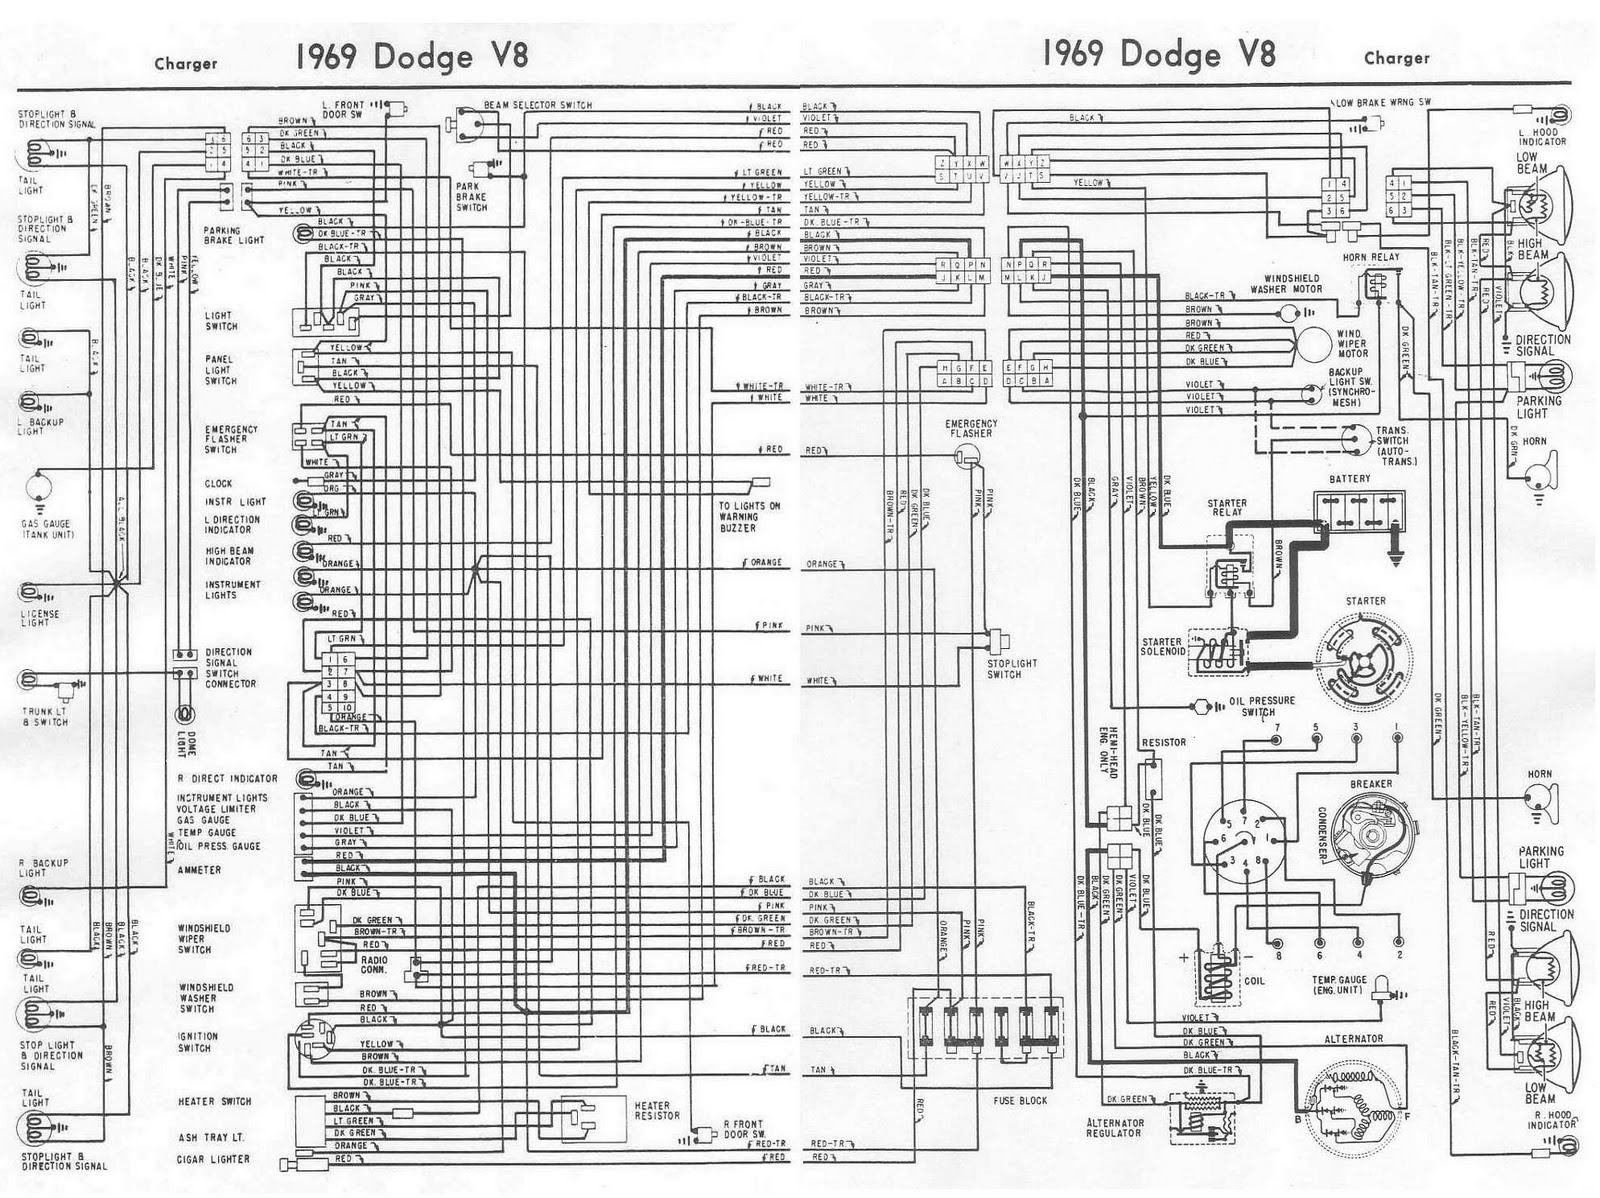 Dodge Charger 1969 V8 Complete Electrical Wiring Diagram All About